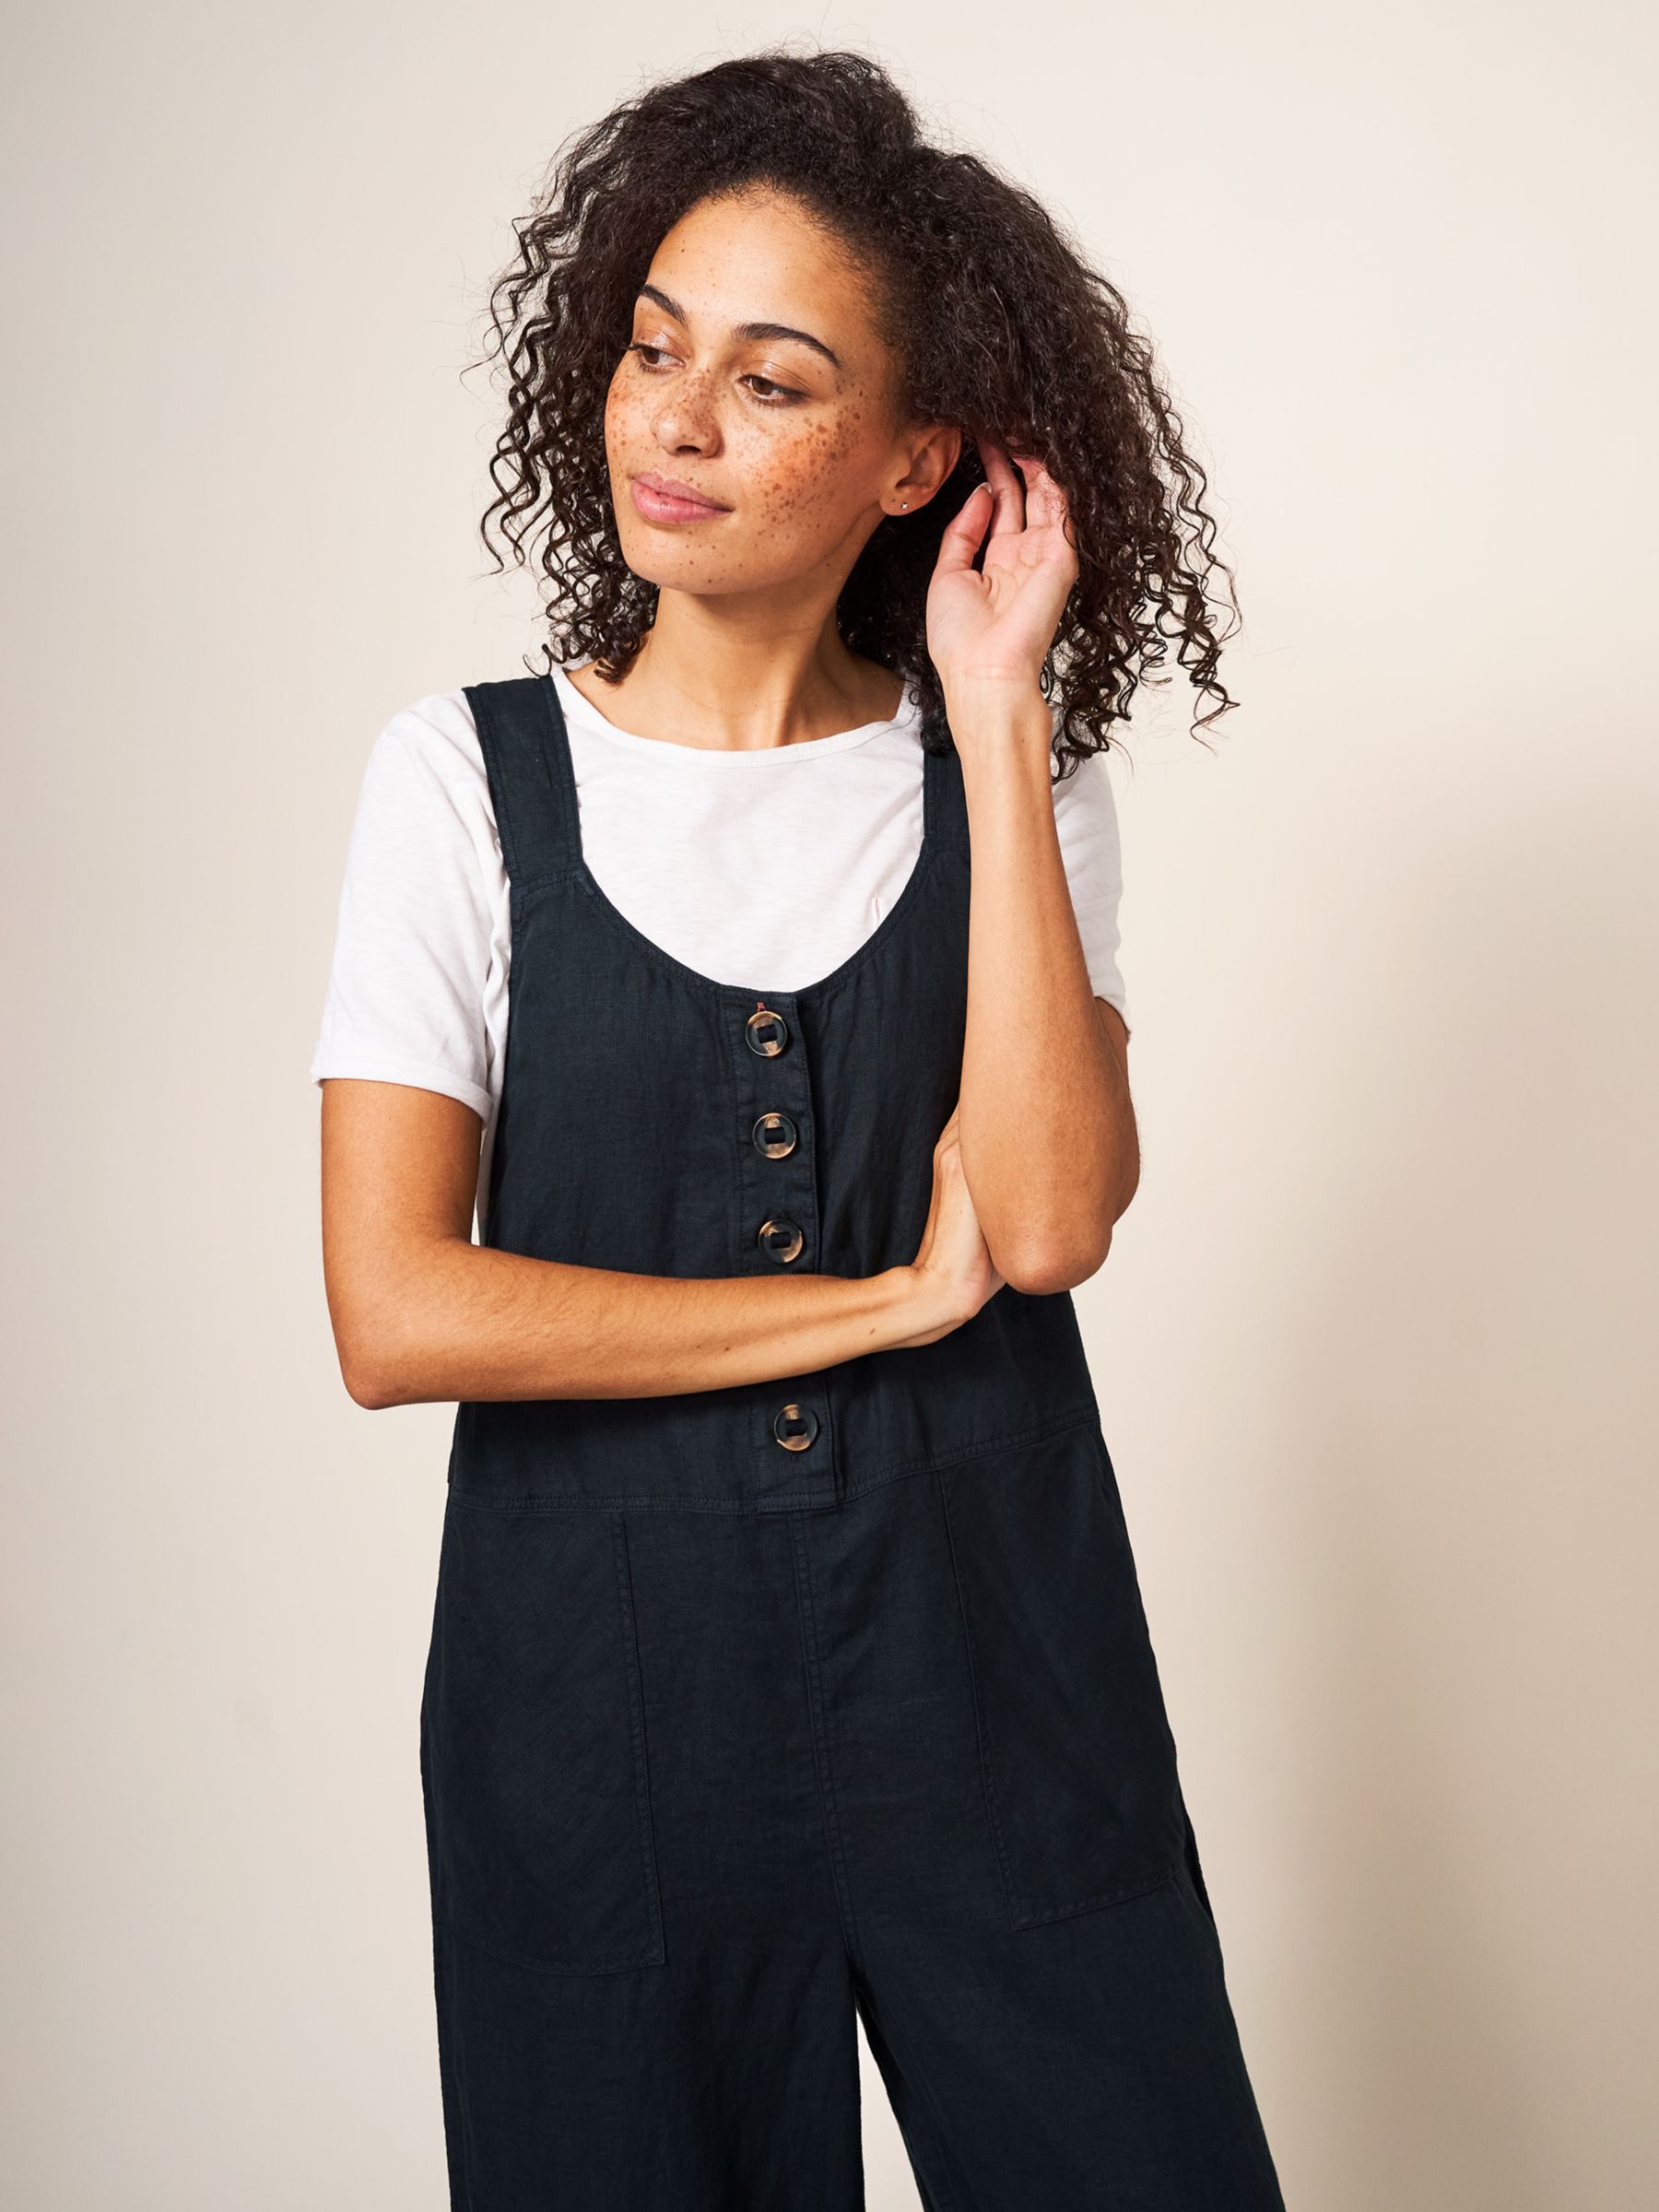 White Stuff Viola Linen Cropped Dungarees, £80.00